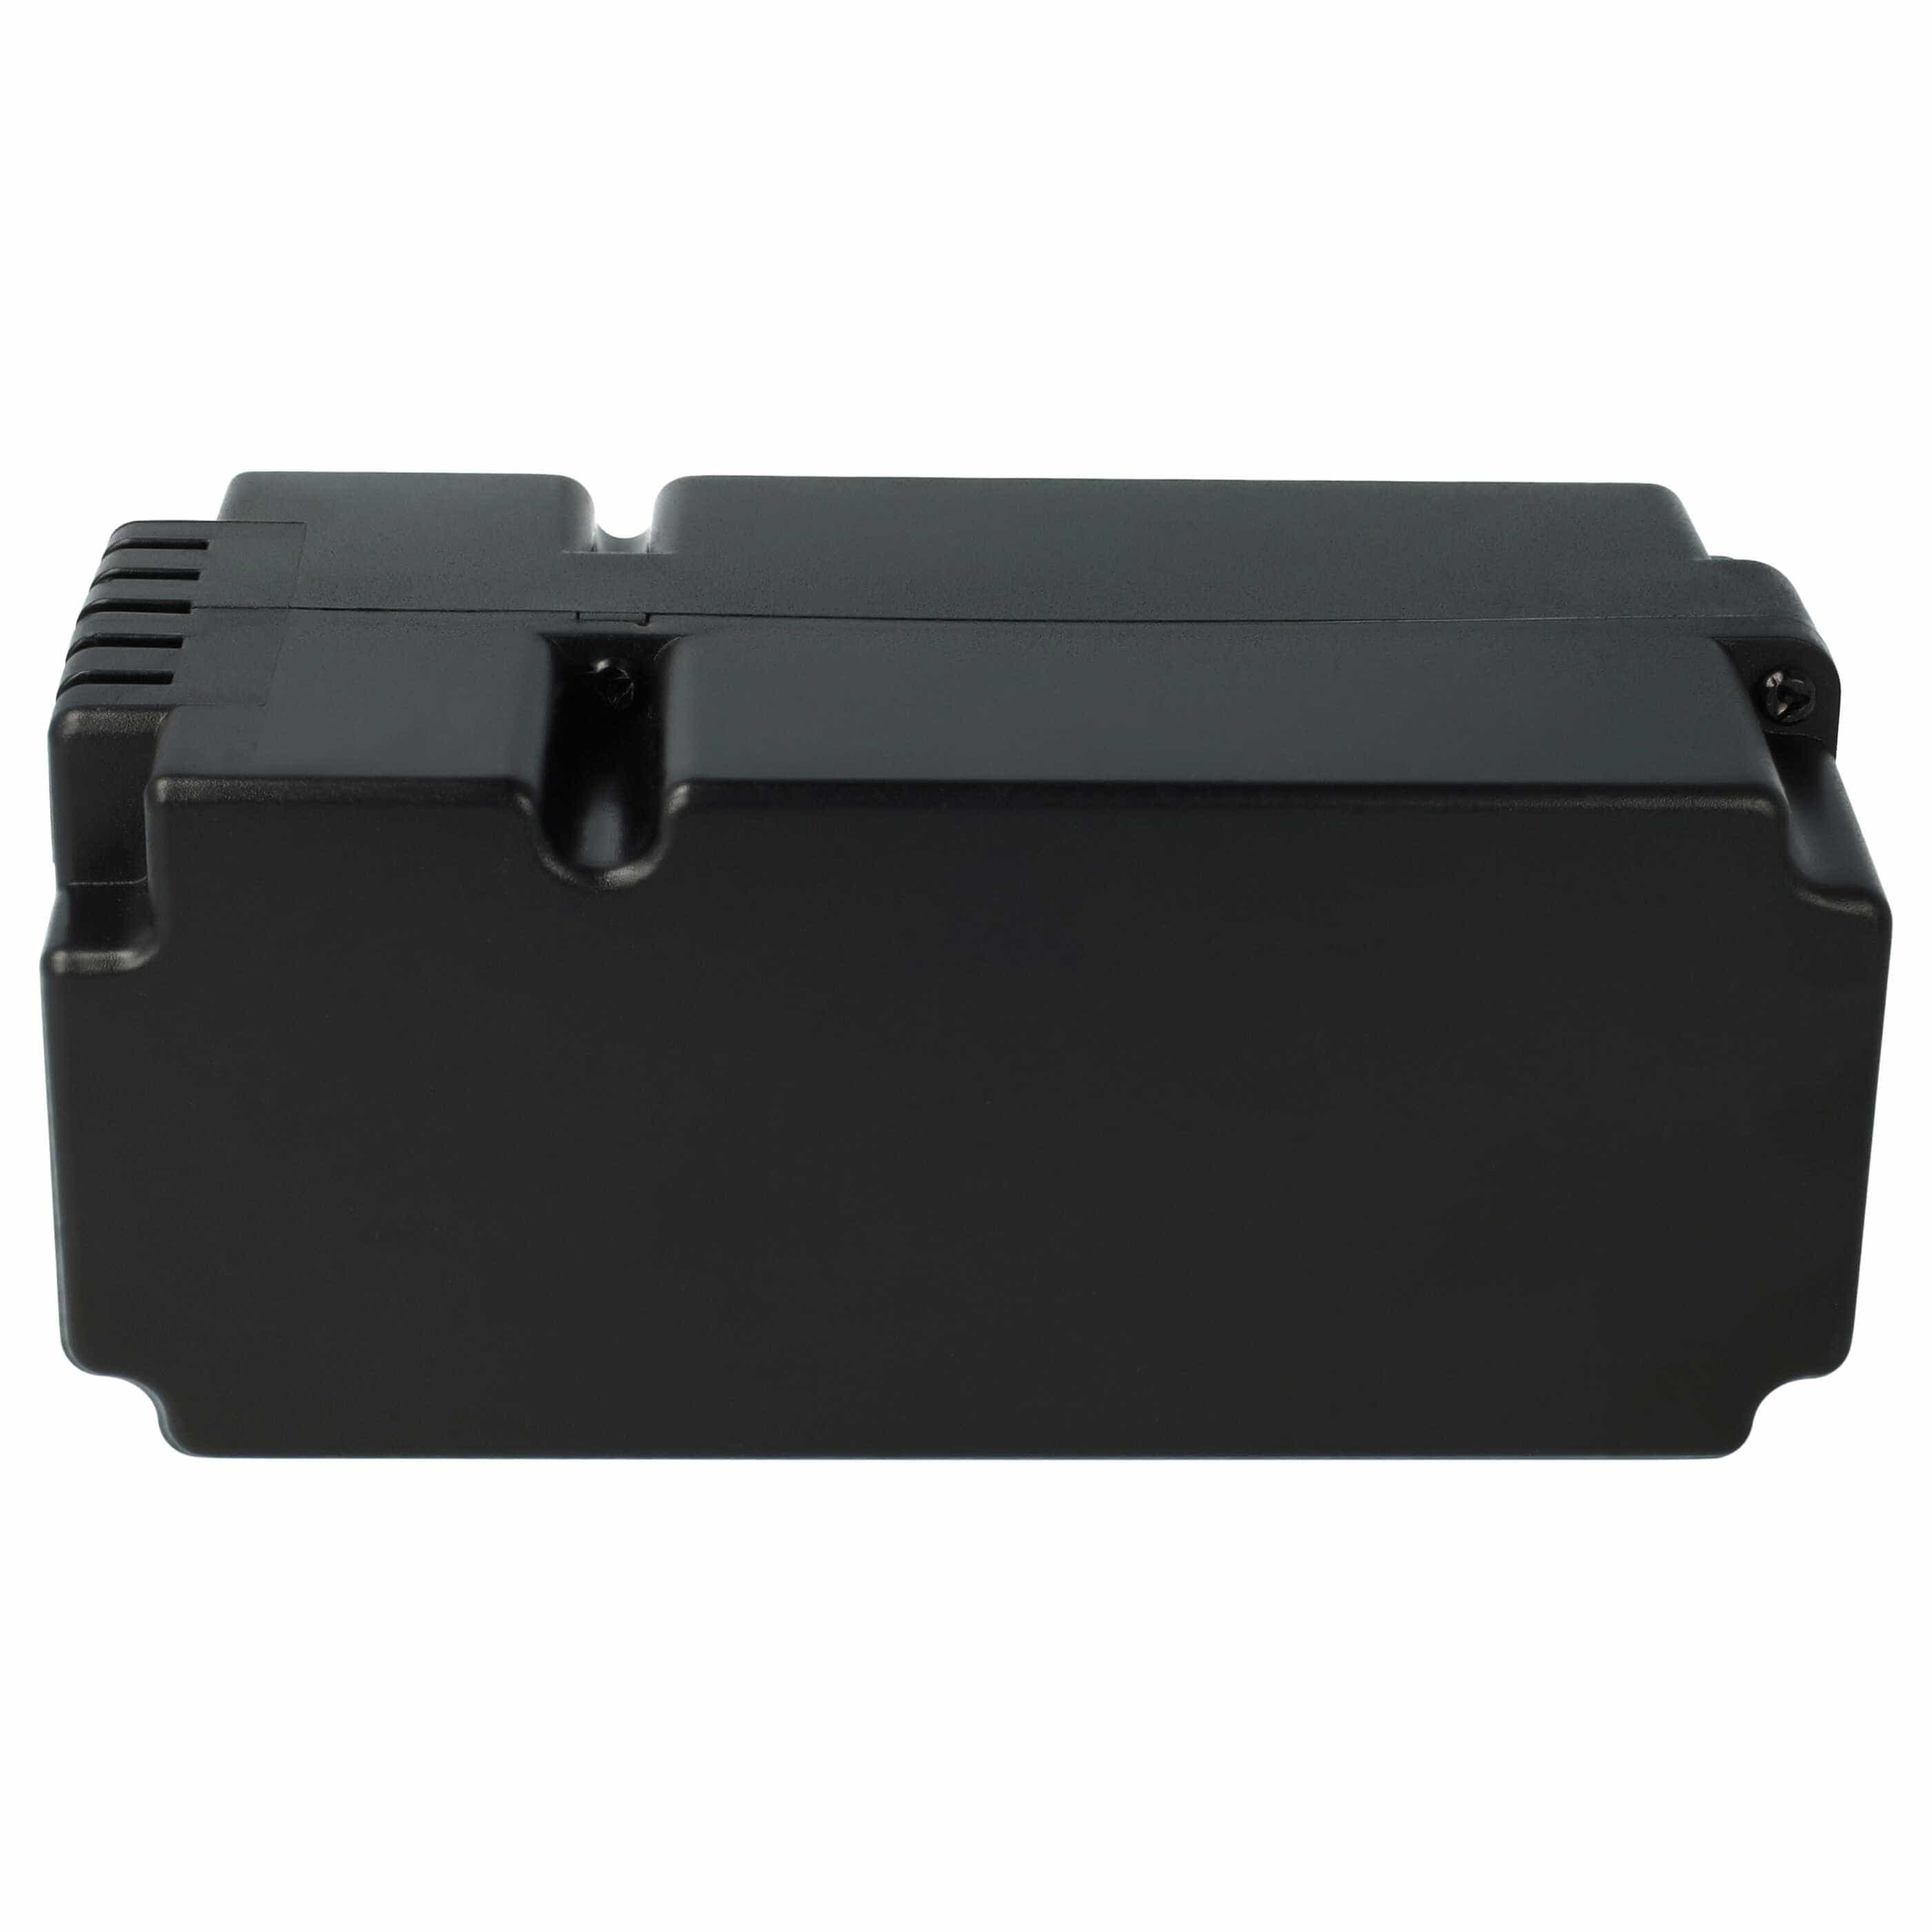 Lawnmower Battery Replacement for Yard Force 862601, 862615, 0862622, 0862622001 - 3000mAh 25.2V Li-Ion